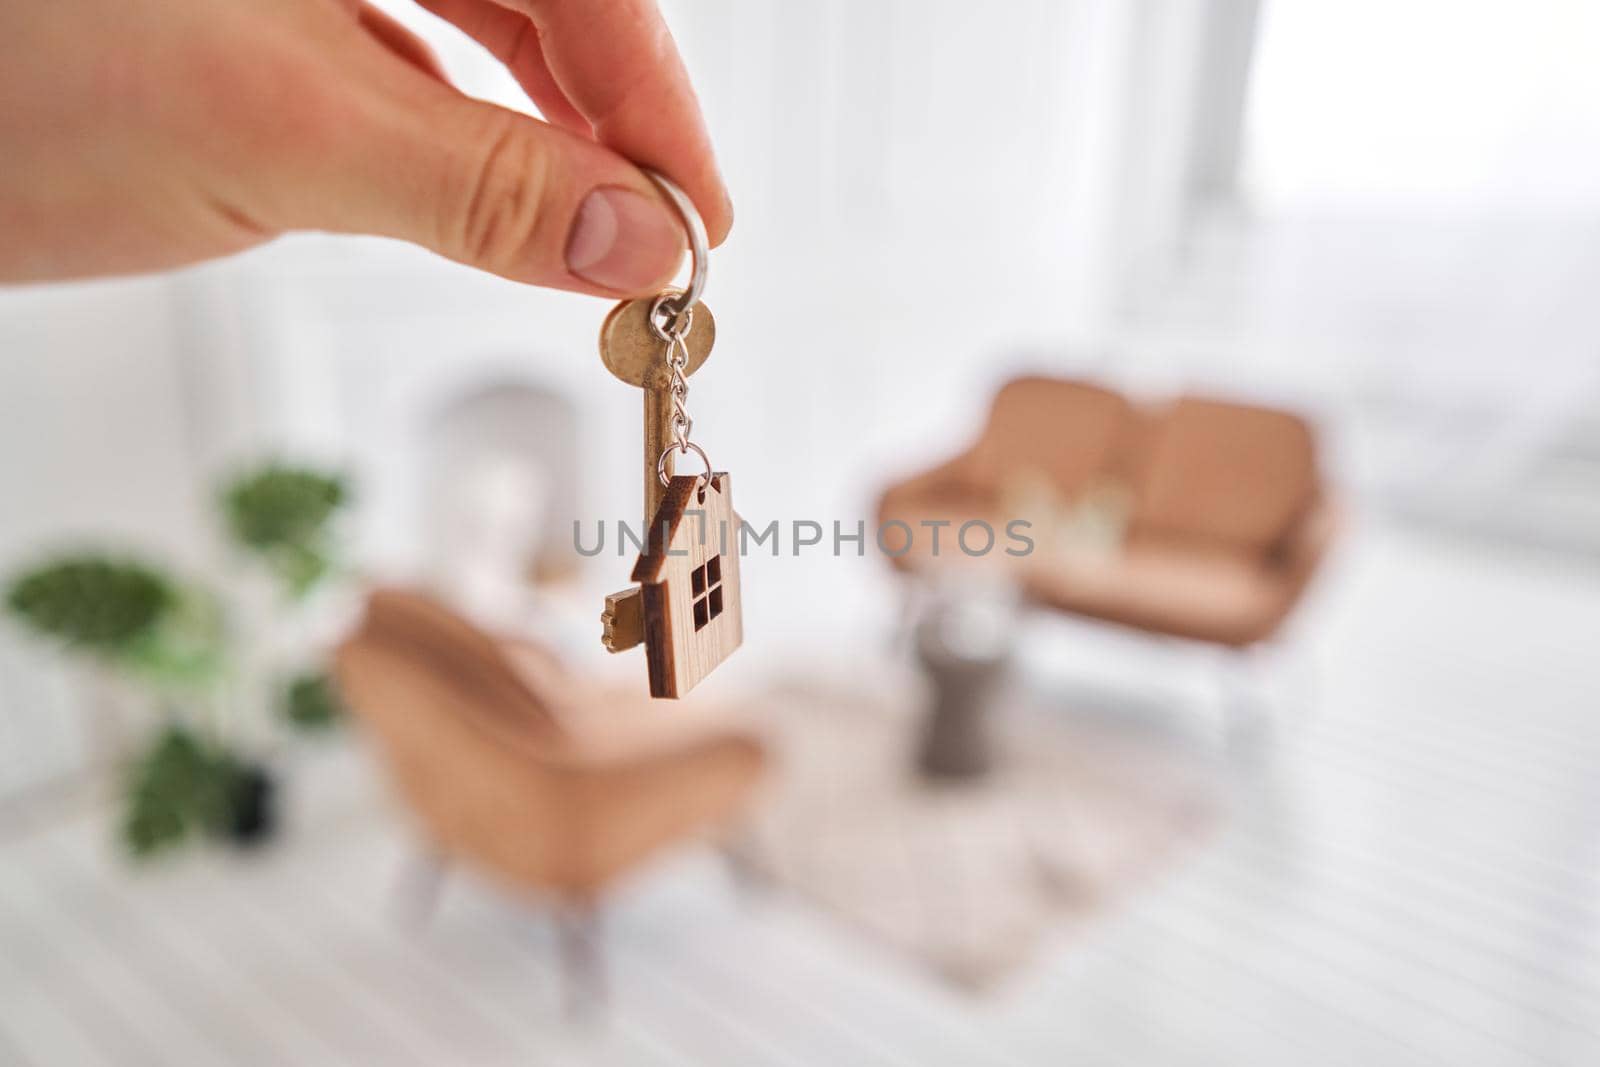 Men hand holding key with house shaped keychain. Modern light lobby interior. Mortgage concept. Real estate, moving home or renting property